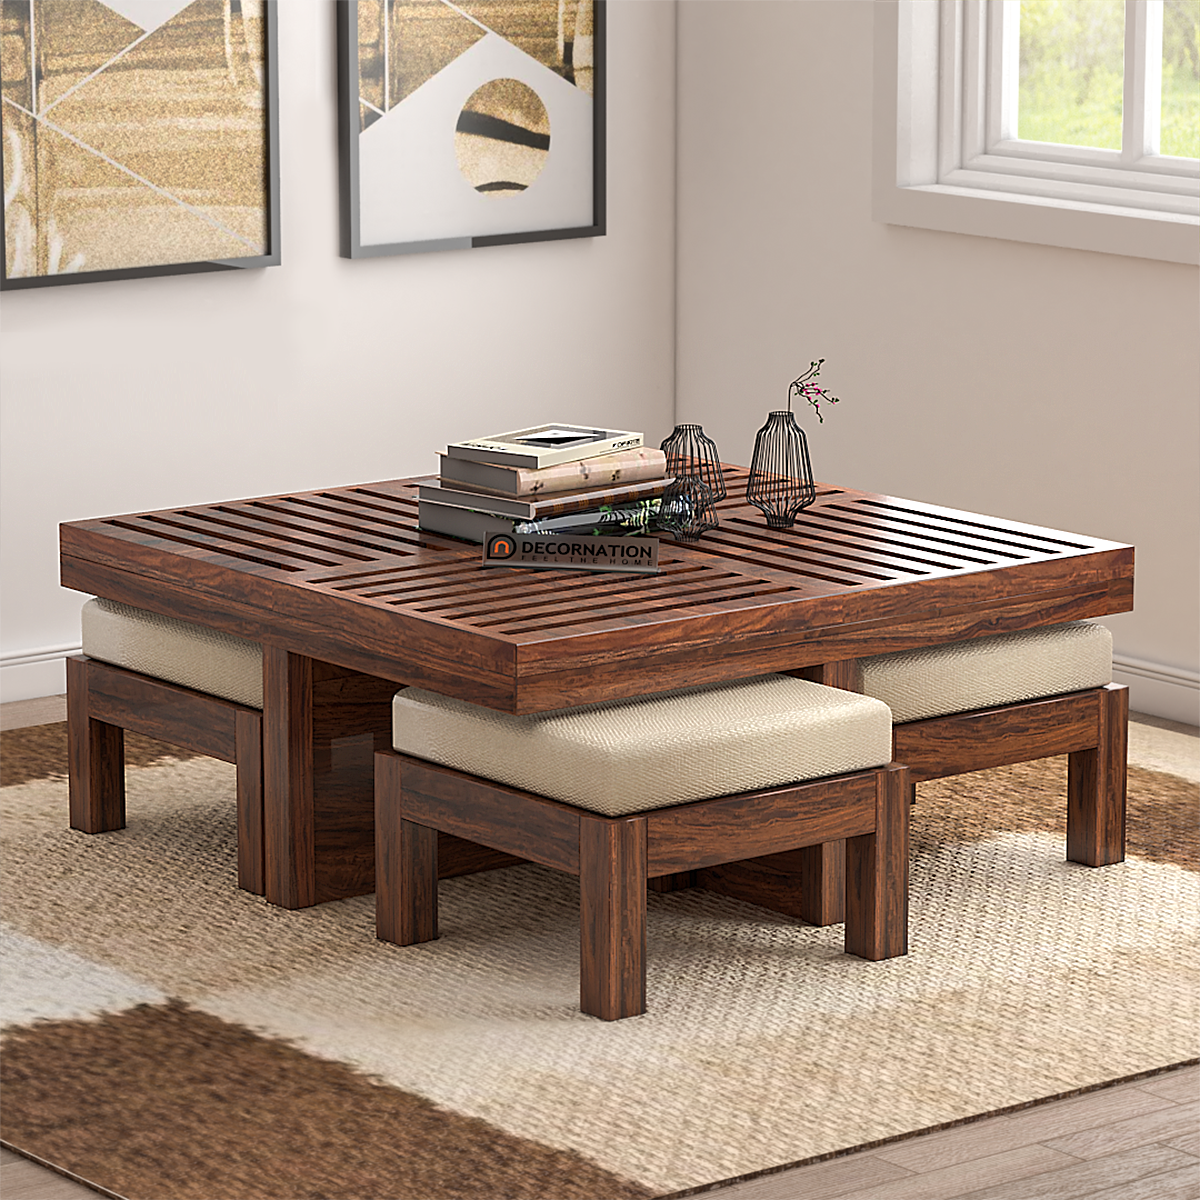 Dundee Wooden 4 Stool with Cushion Coffee Table – Brown